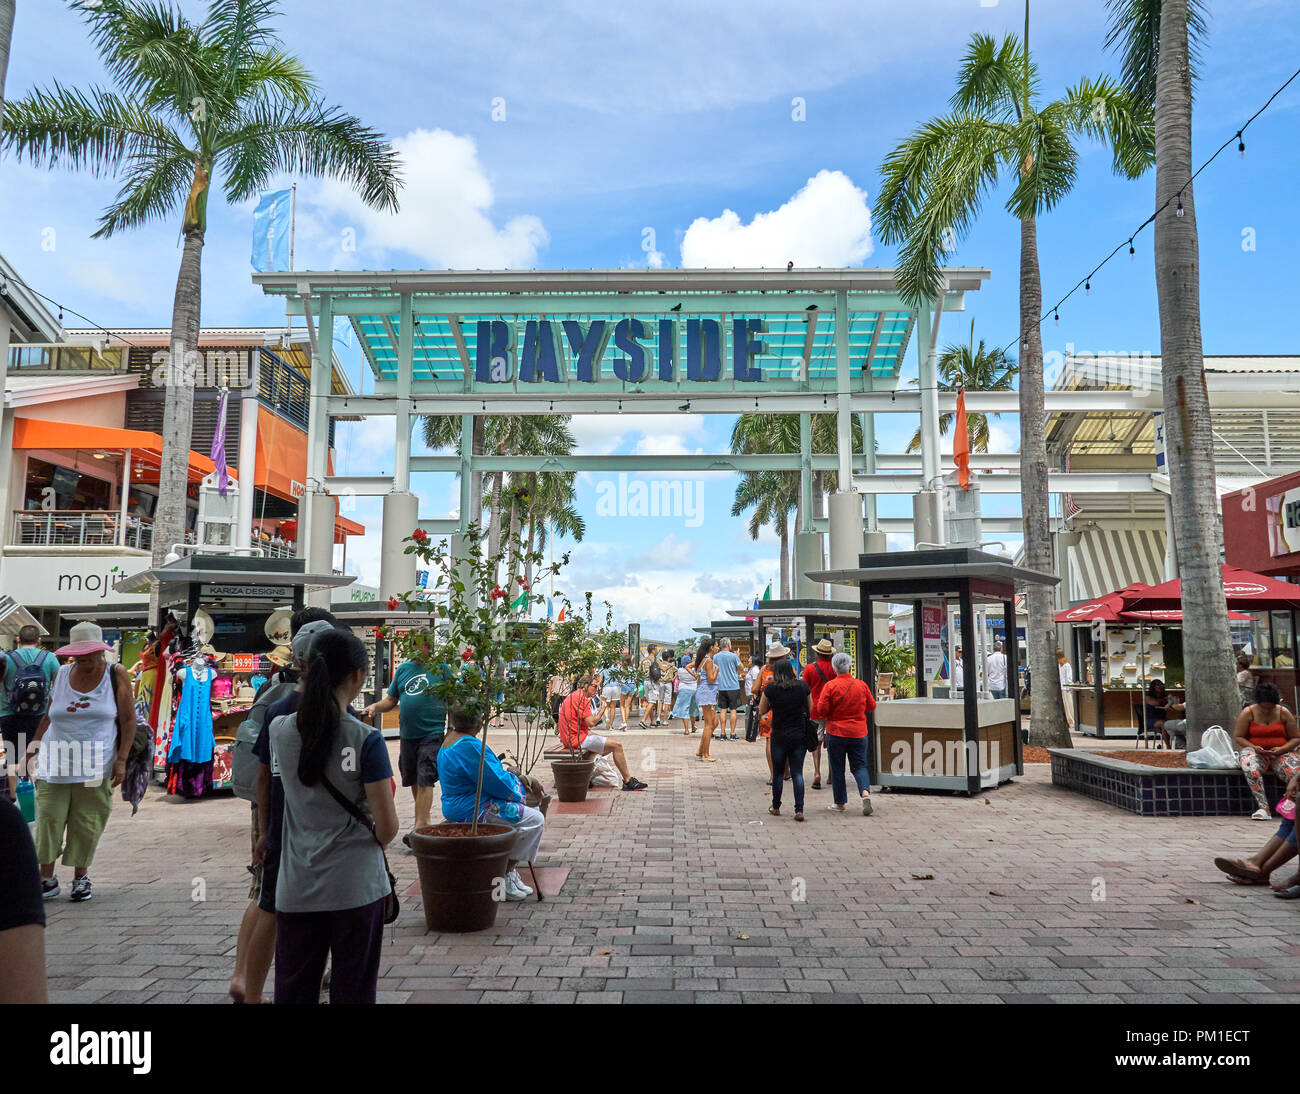 MIAMI, USA - AUGUST 22, 2018: Bayside Marketplace sign in Miami. Bayside Marketplace is two-story open air shopping center located in the Downtown Mia Stock Photo